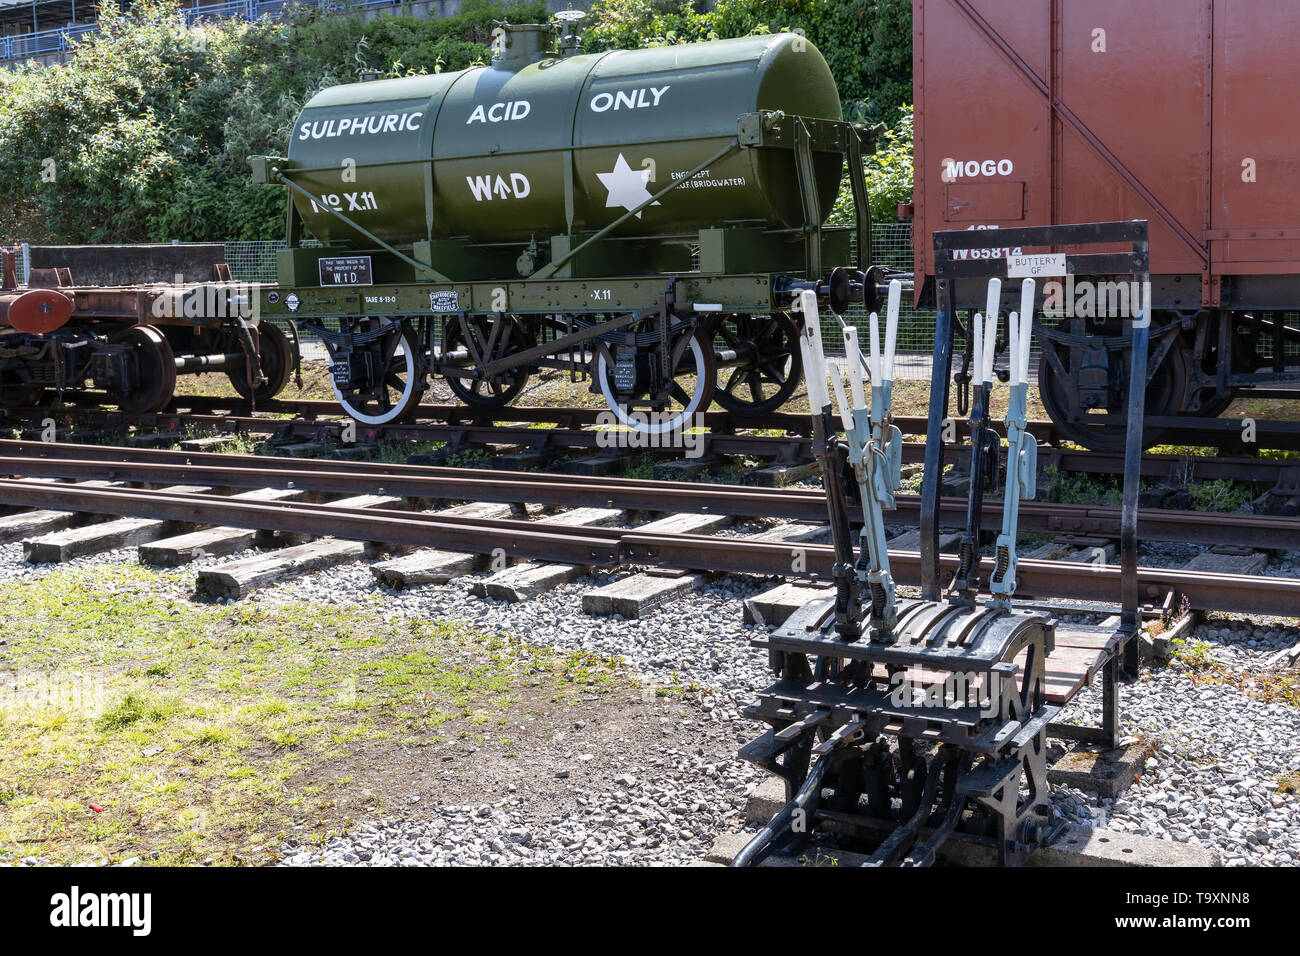 BRISTOL, UK - MAY 14 : Railway rolling stock in the dockyard area of Bristol on May 14, 2019 Stock Photo